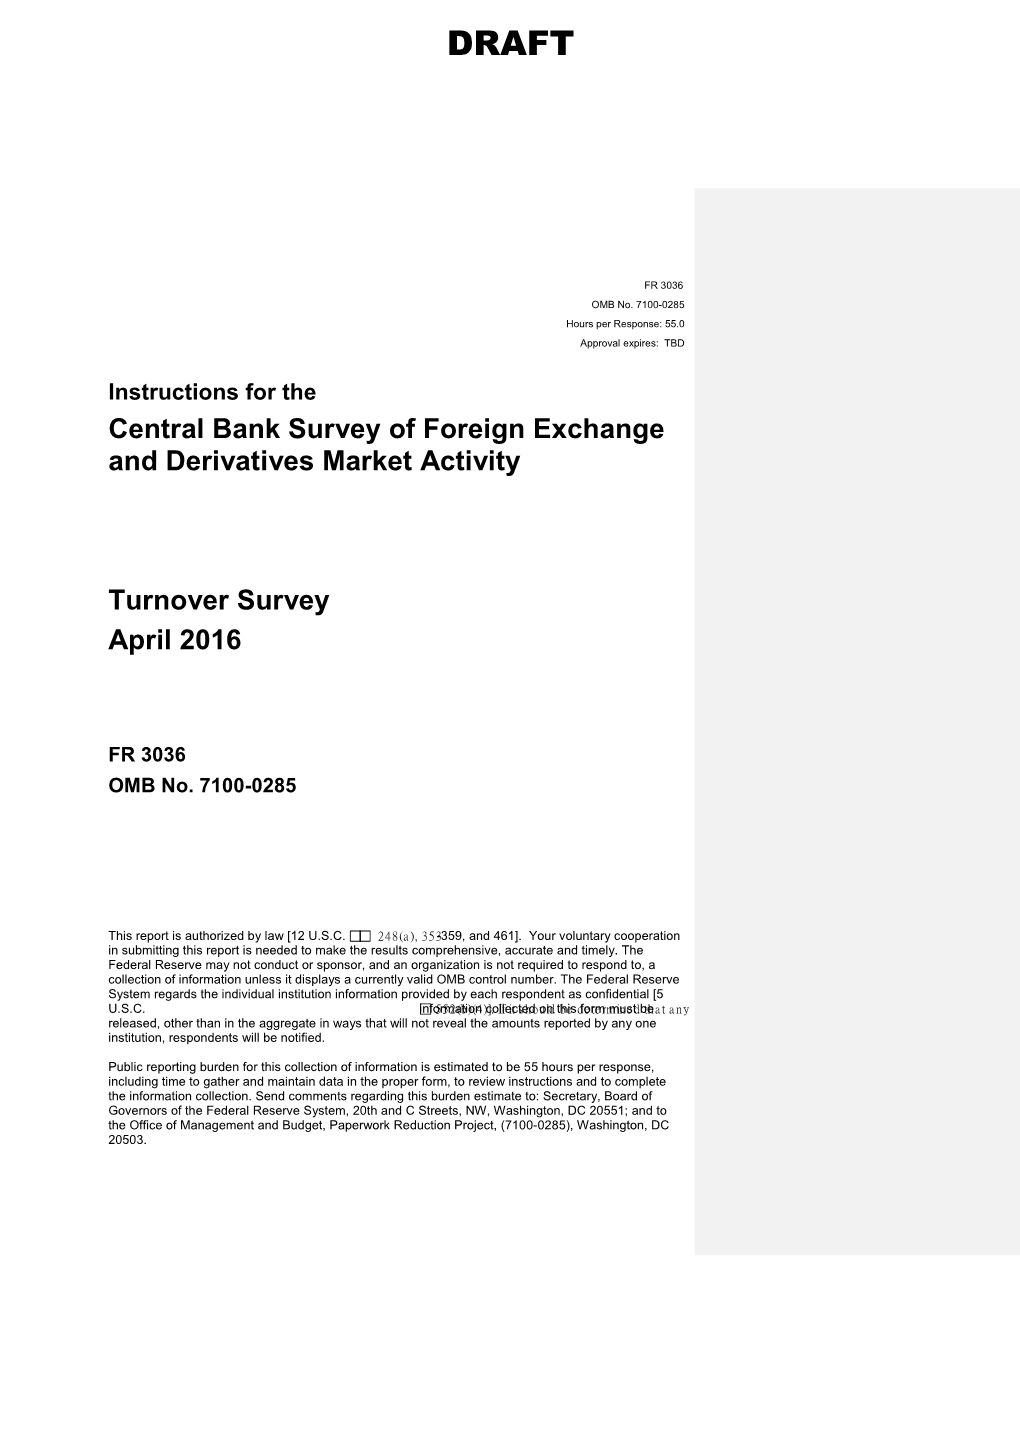 Central Bank Survey of Foreign Exchange and Derivatives Market Activity Turnover Survey April 2016